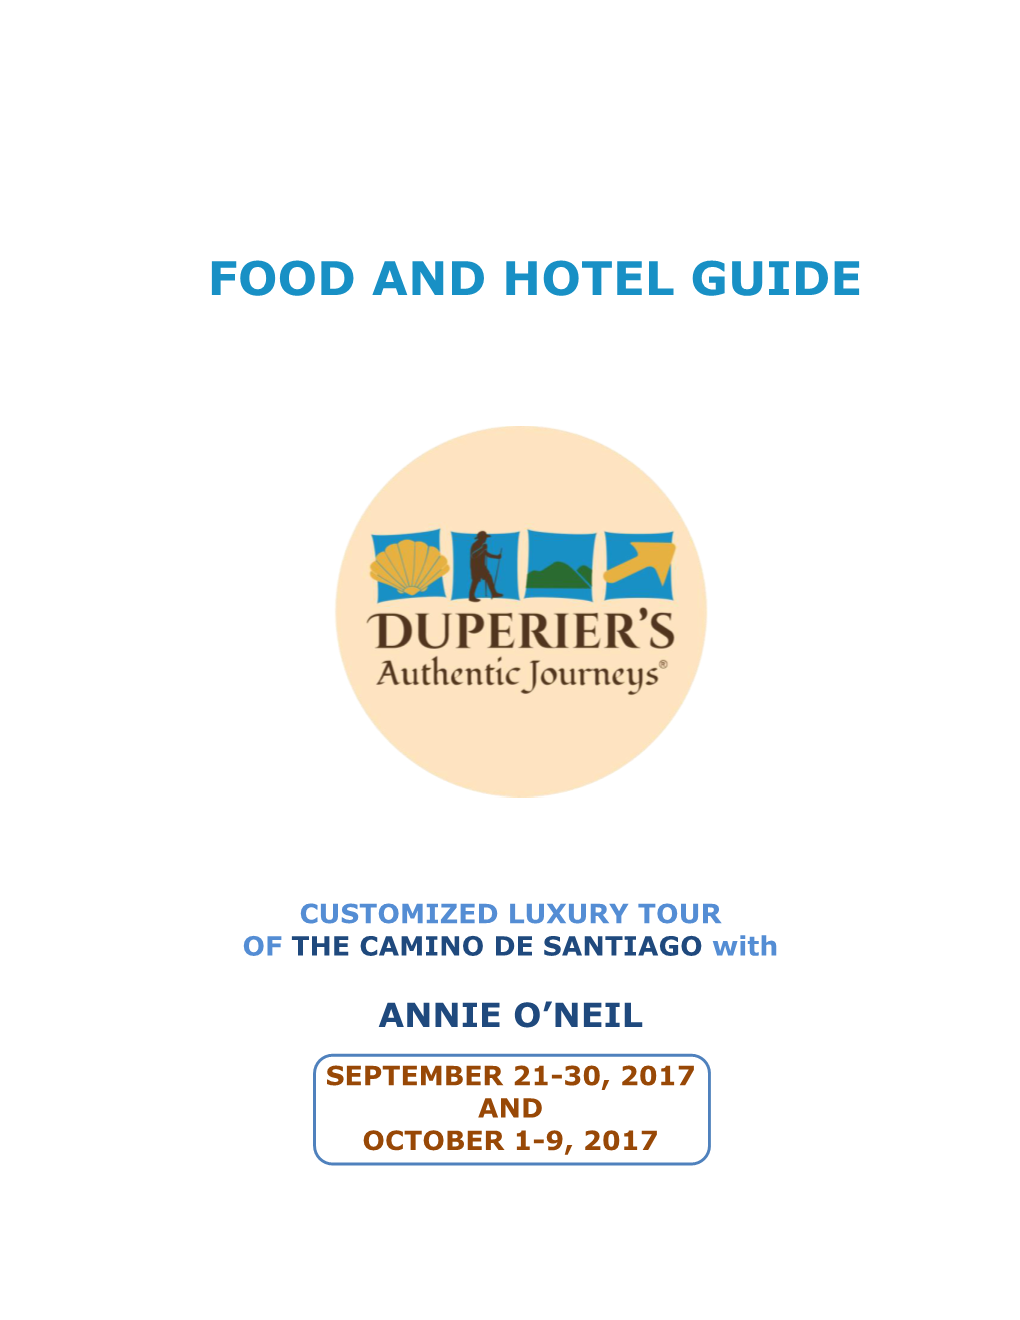 Food and Hotel Guide